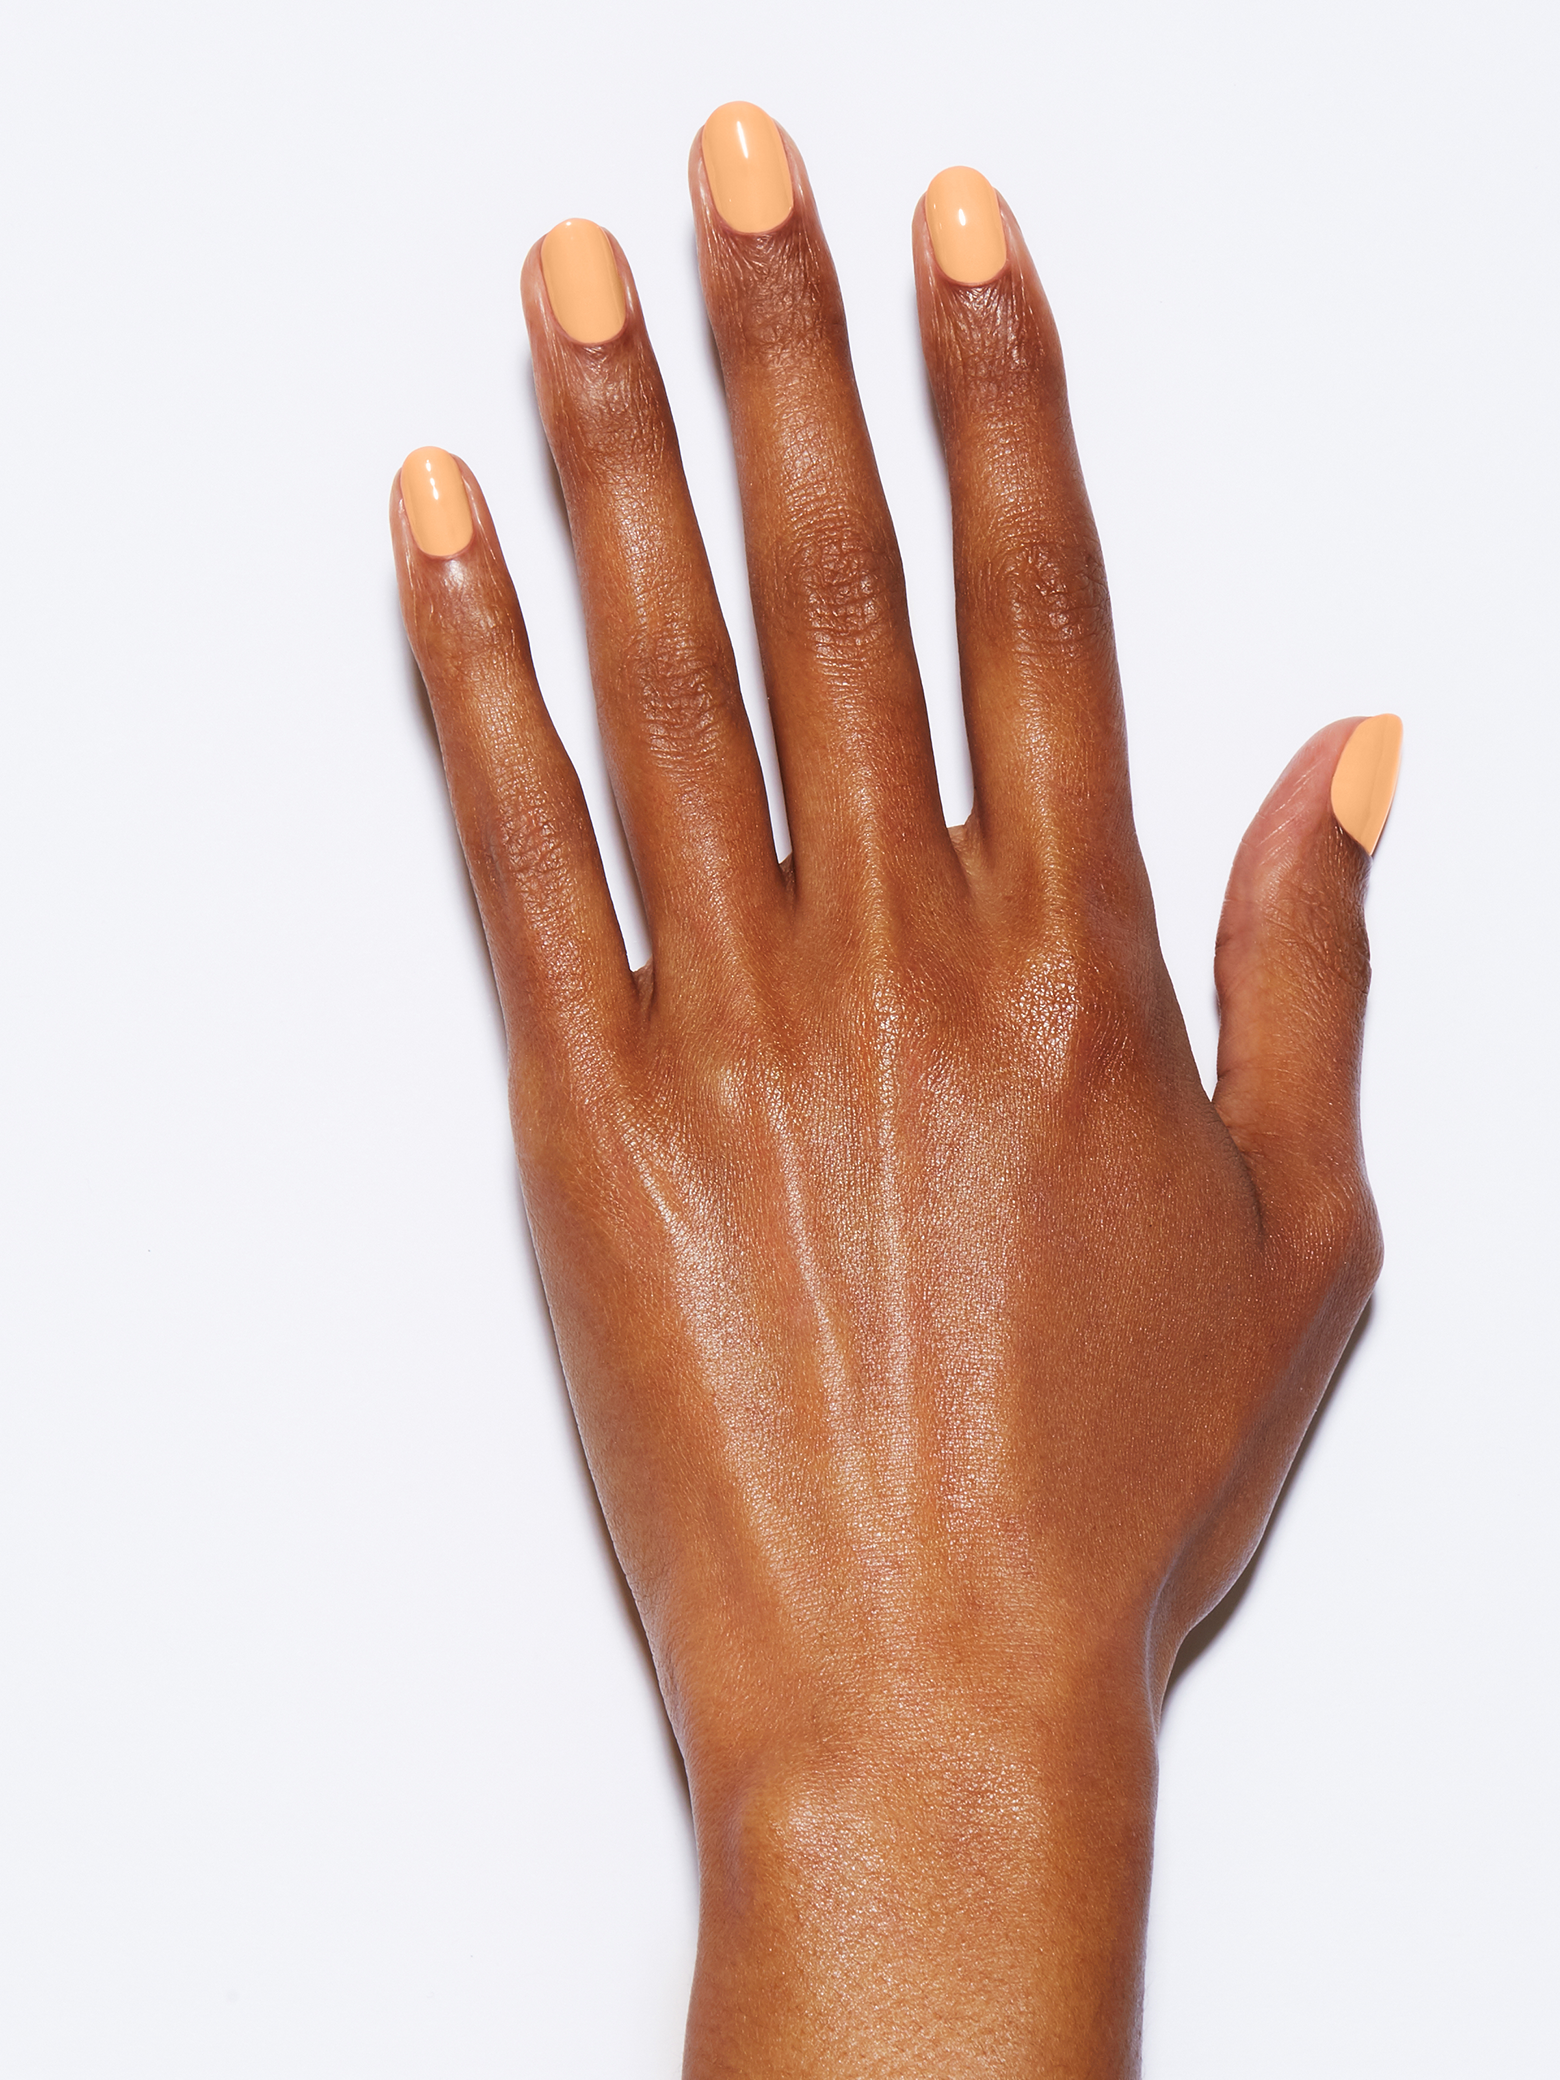 Creamsicle with peach undertones, Full coverage, Rich